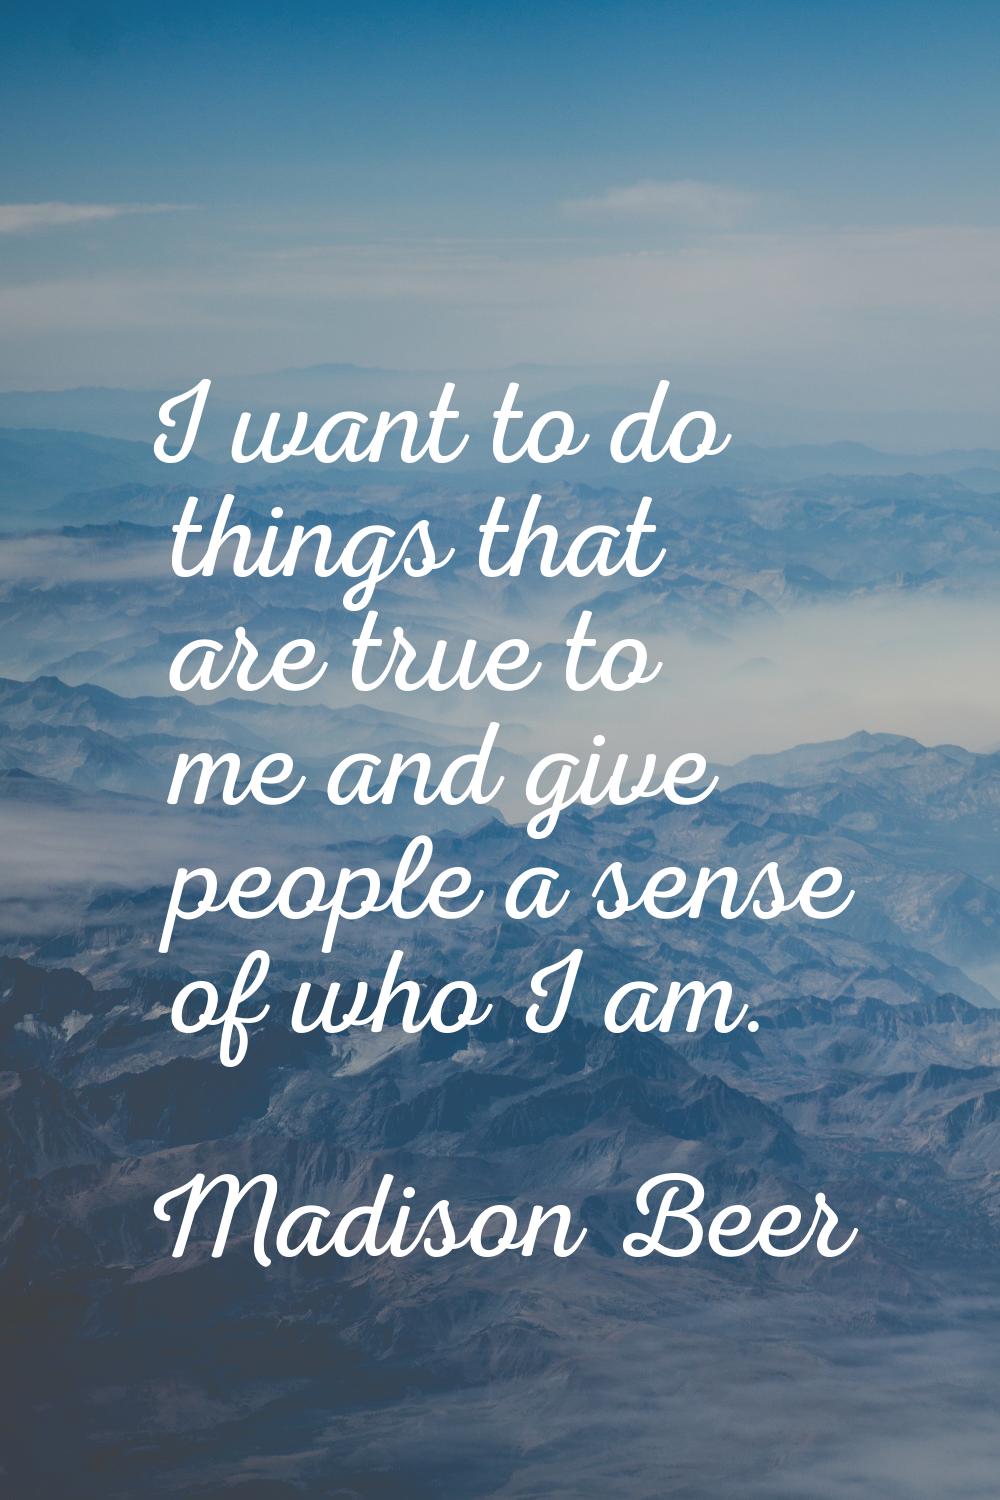 I want to do things that are true to me and give people a sense of who I am.